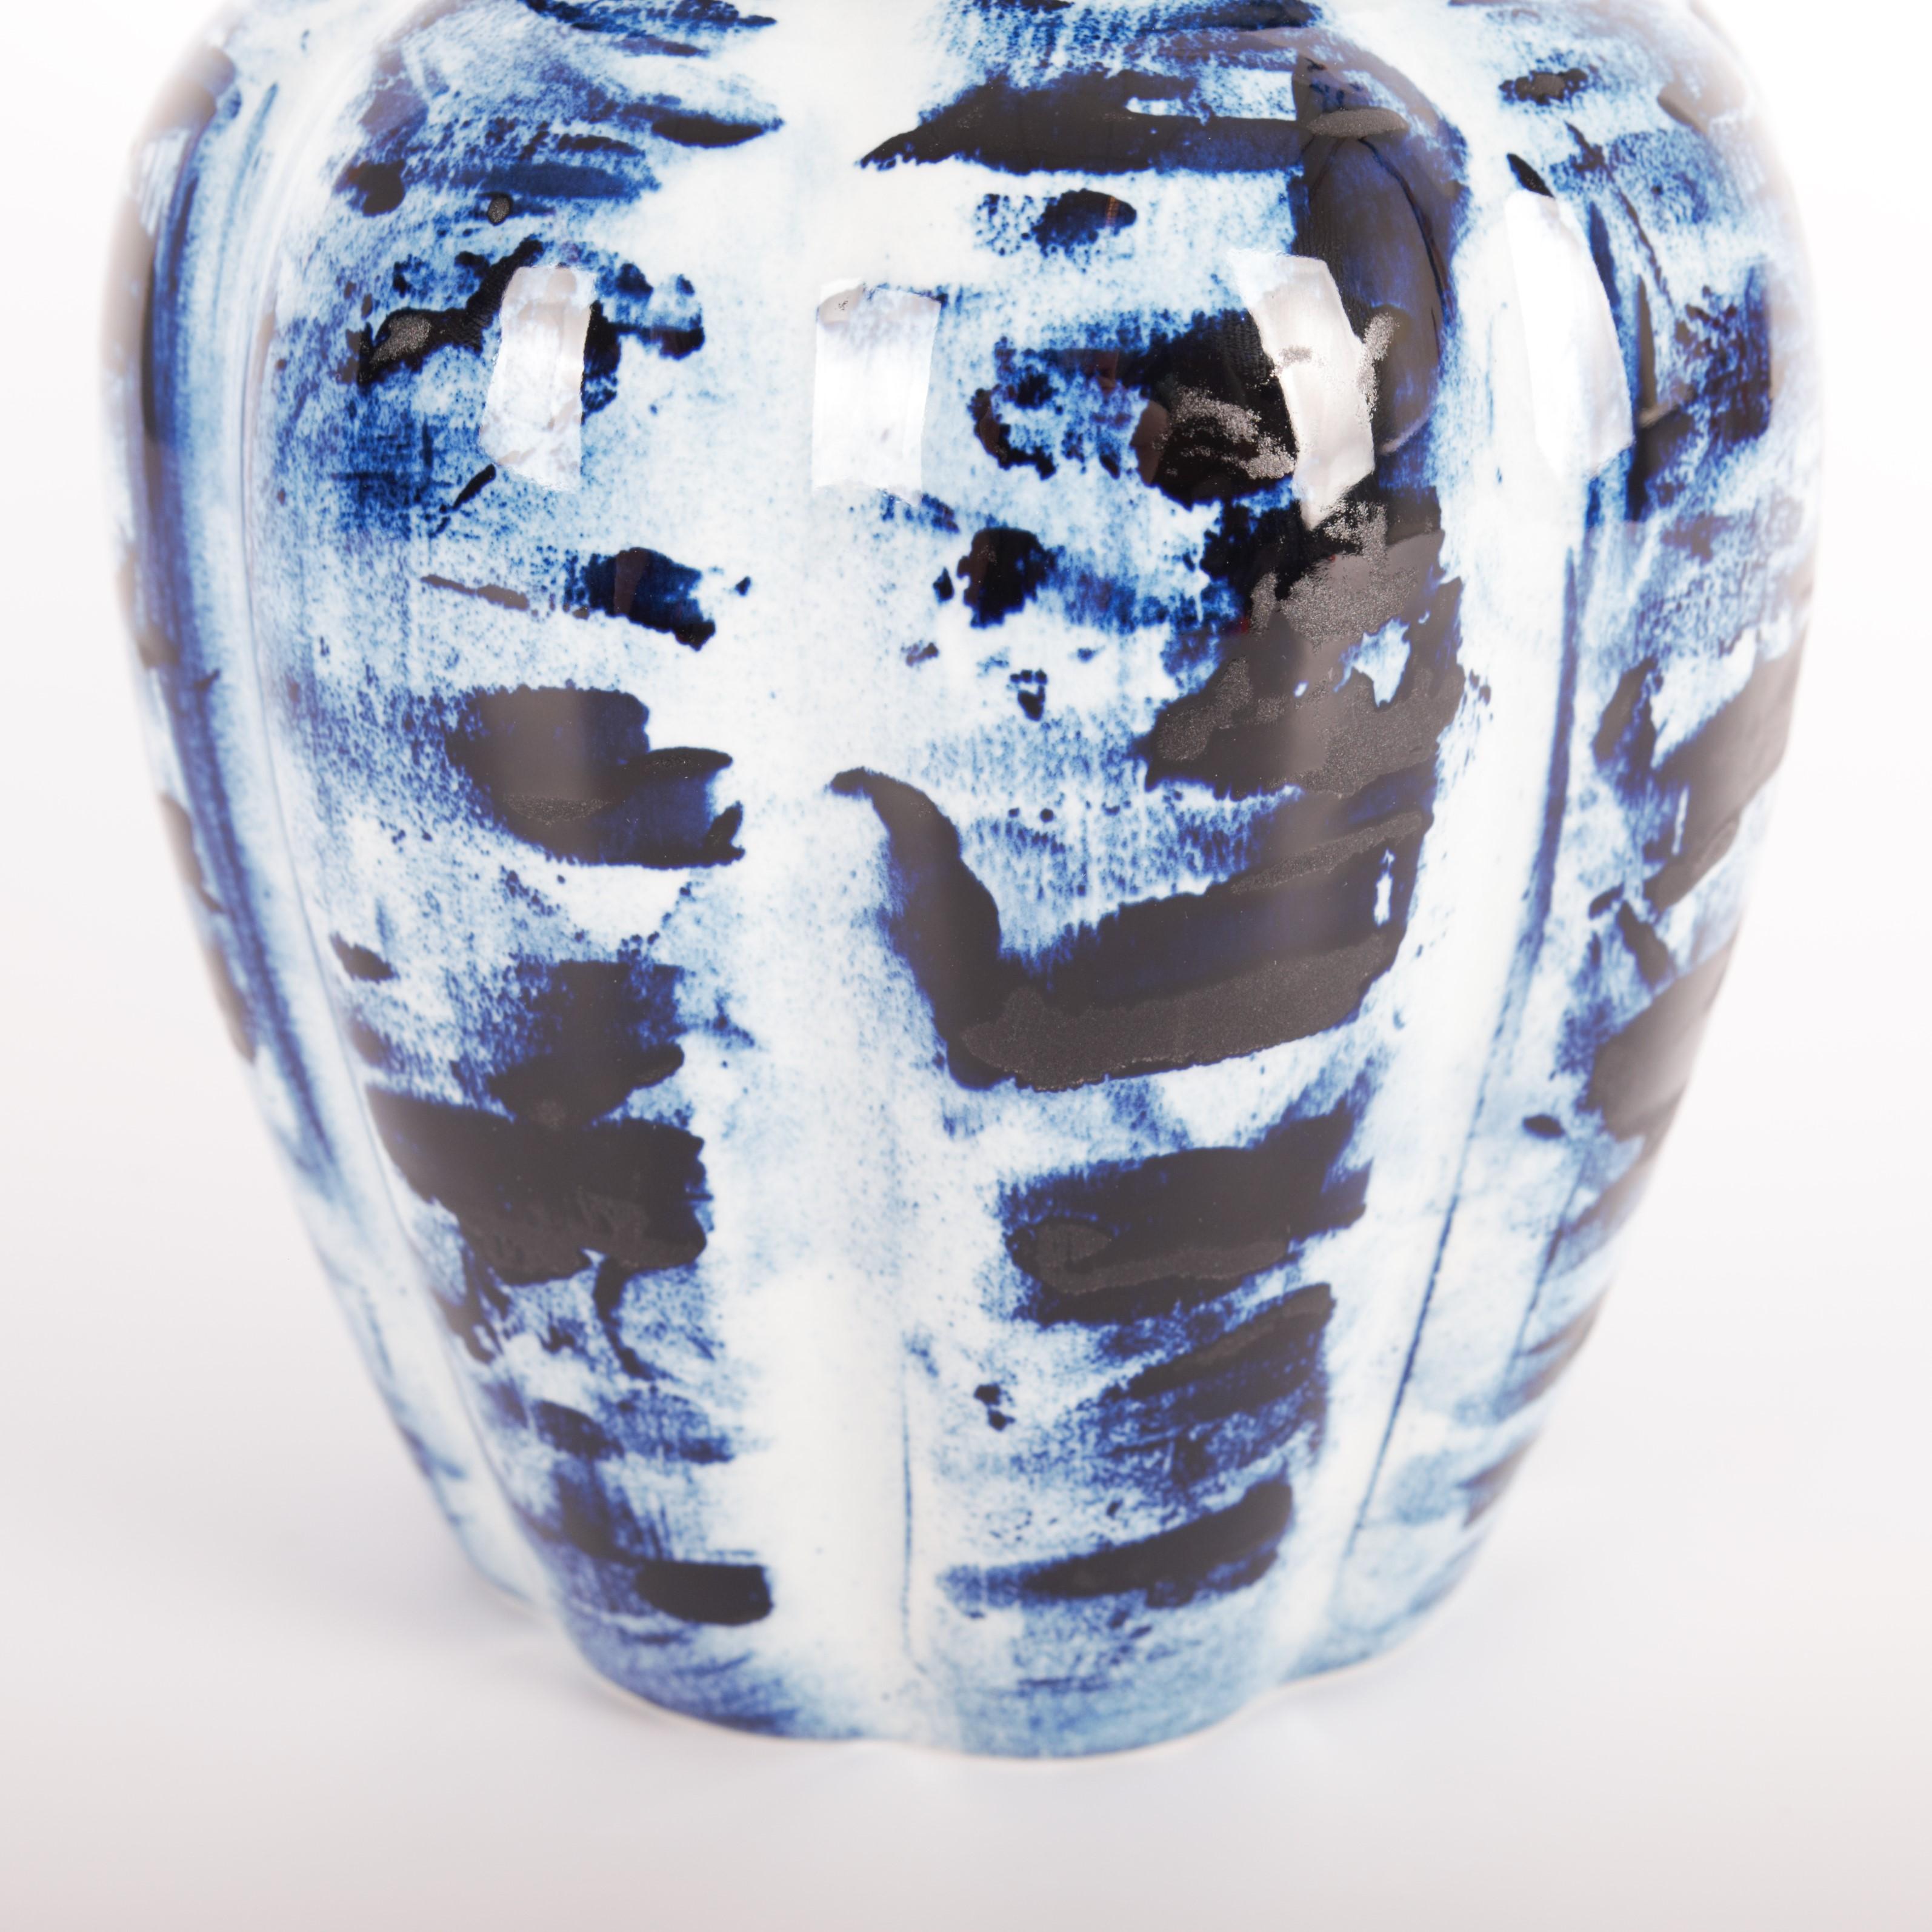 Delft Blue Vase with Lid #1, by Marcel Wanders, Hand Painted, 2006, Unique 1